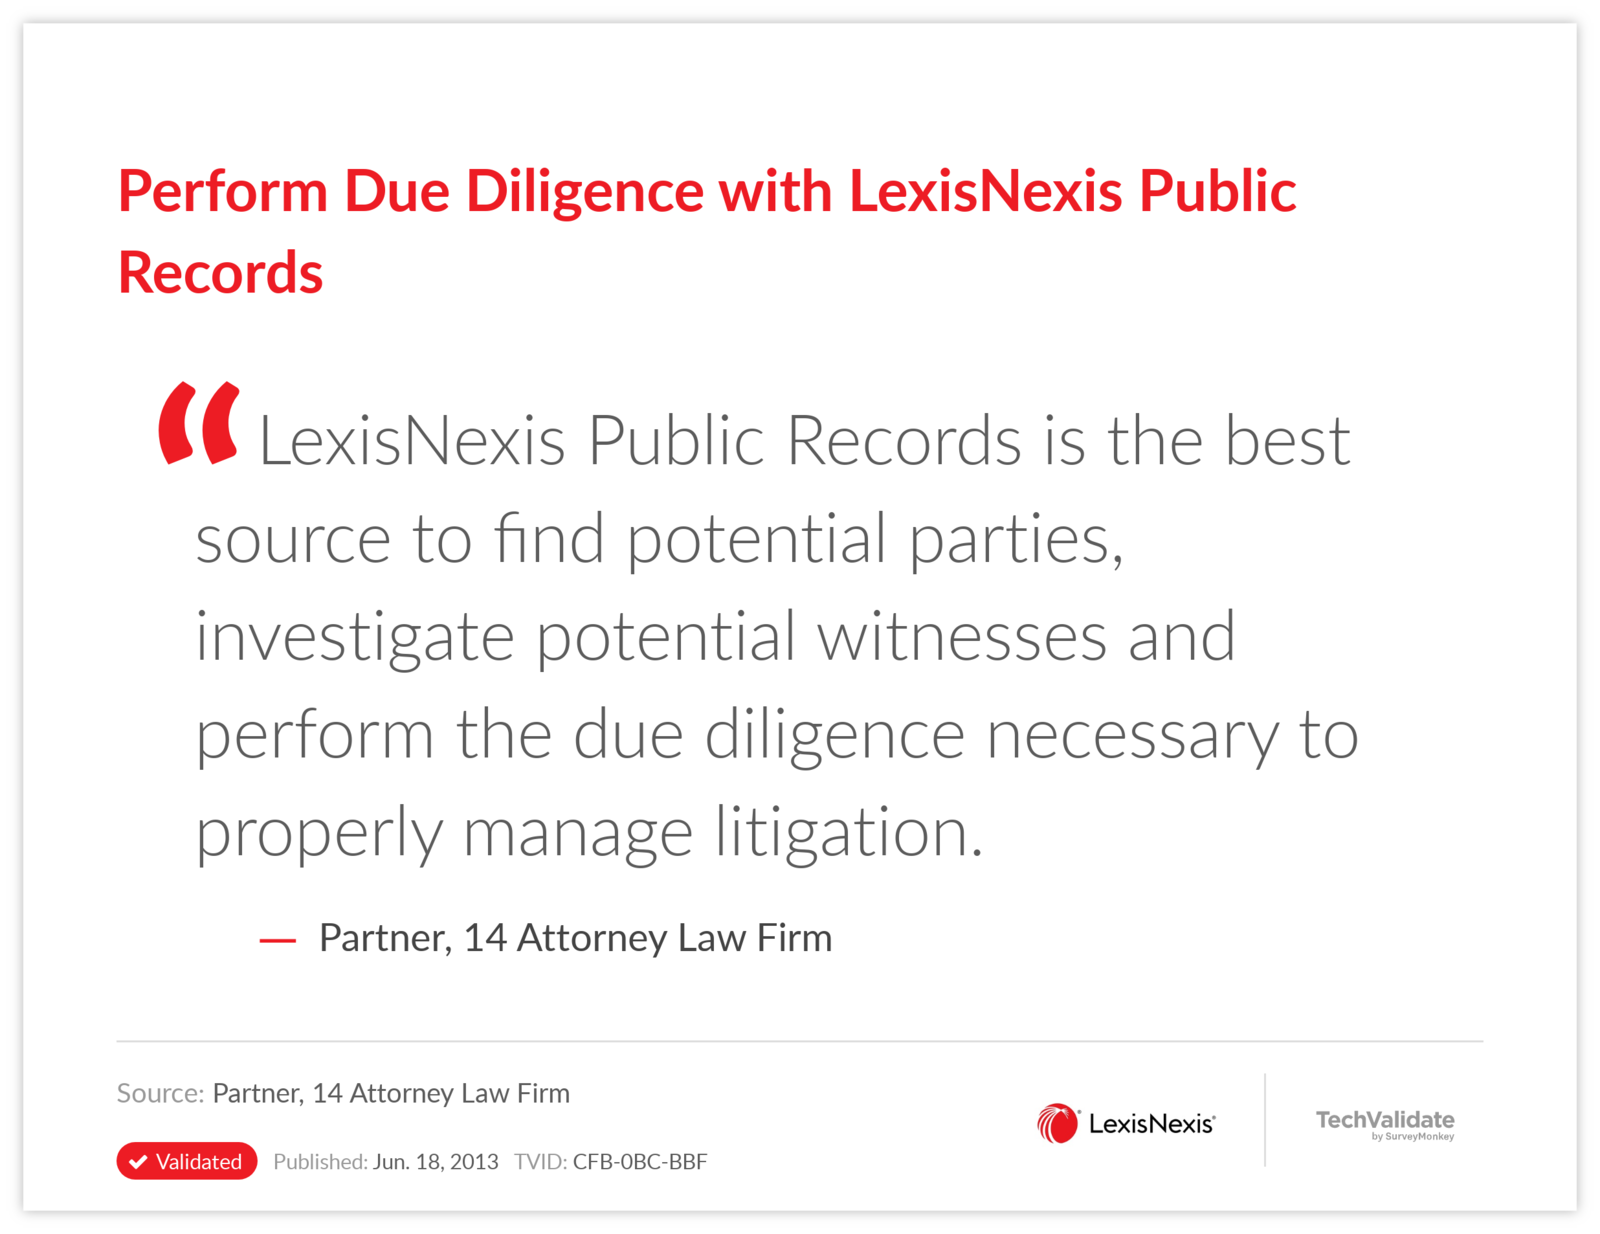 Perform Due Diligence with LexisNexis Public Records